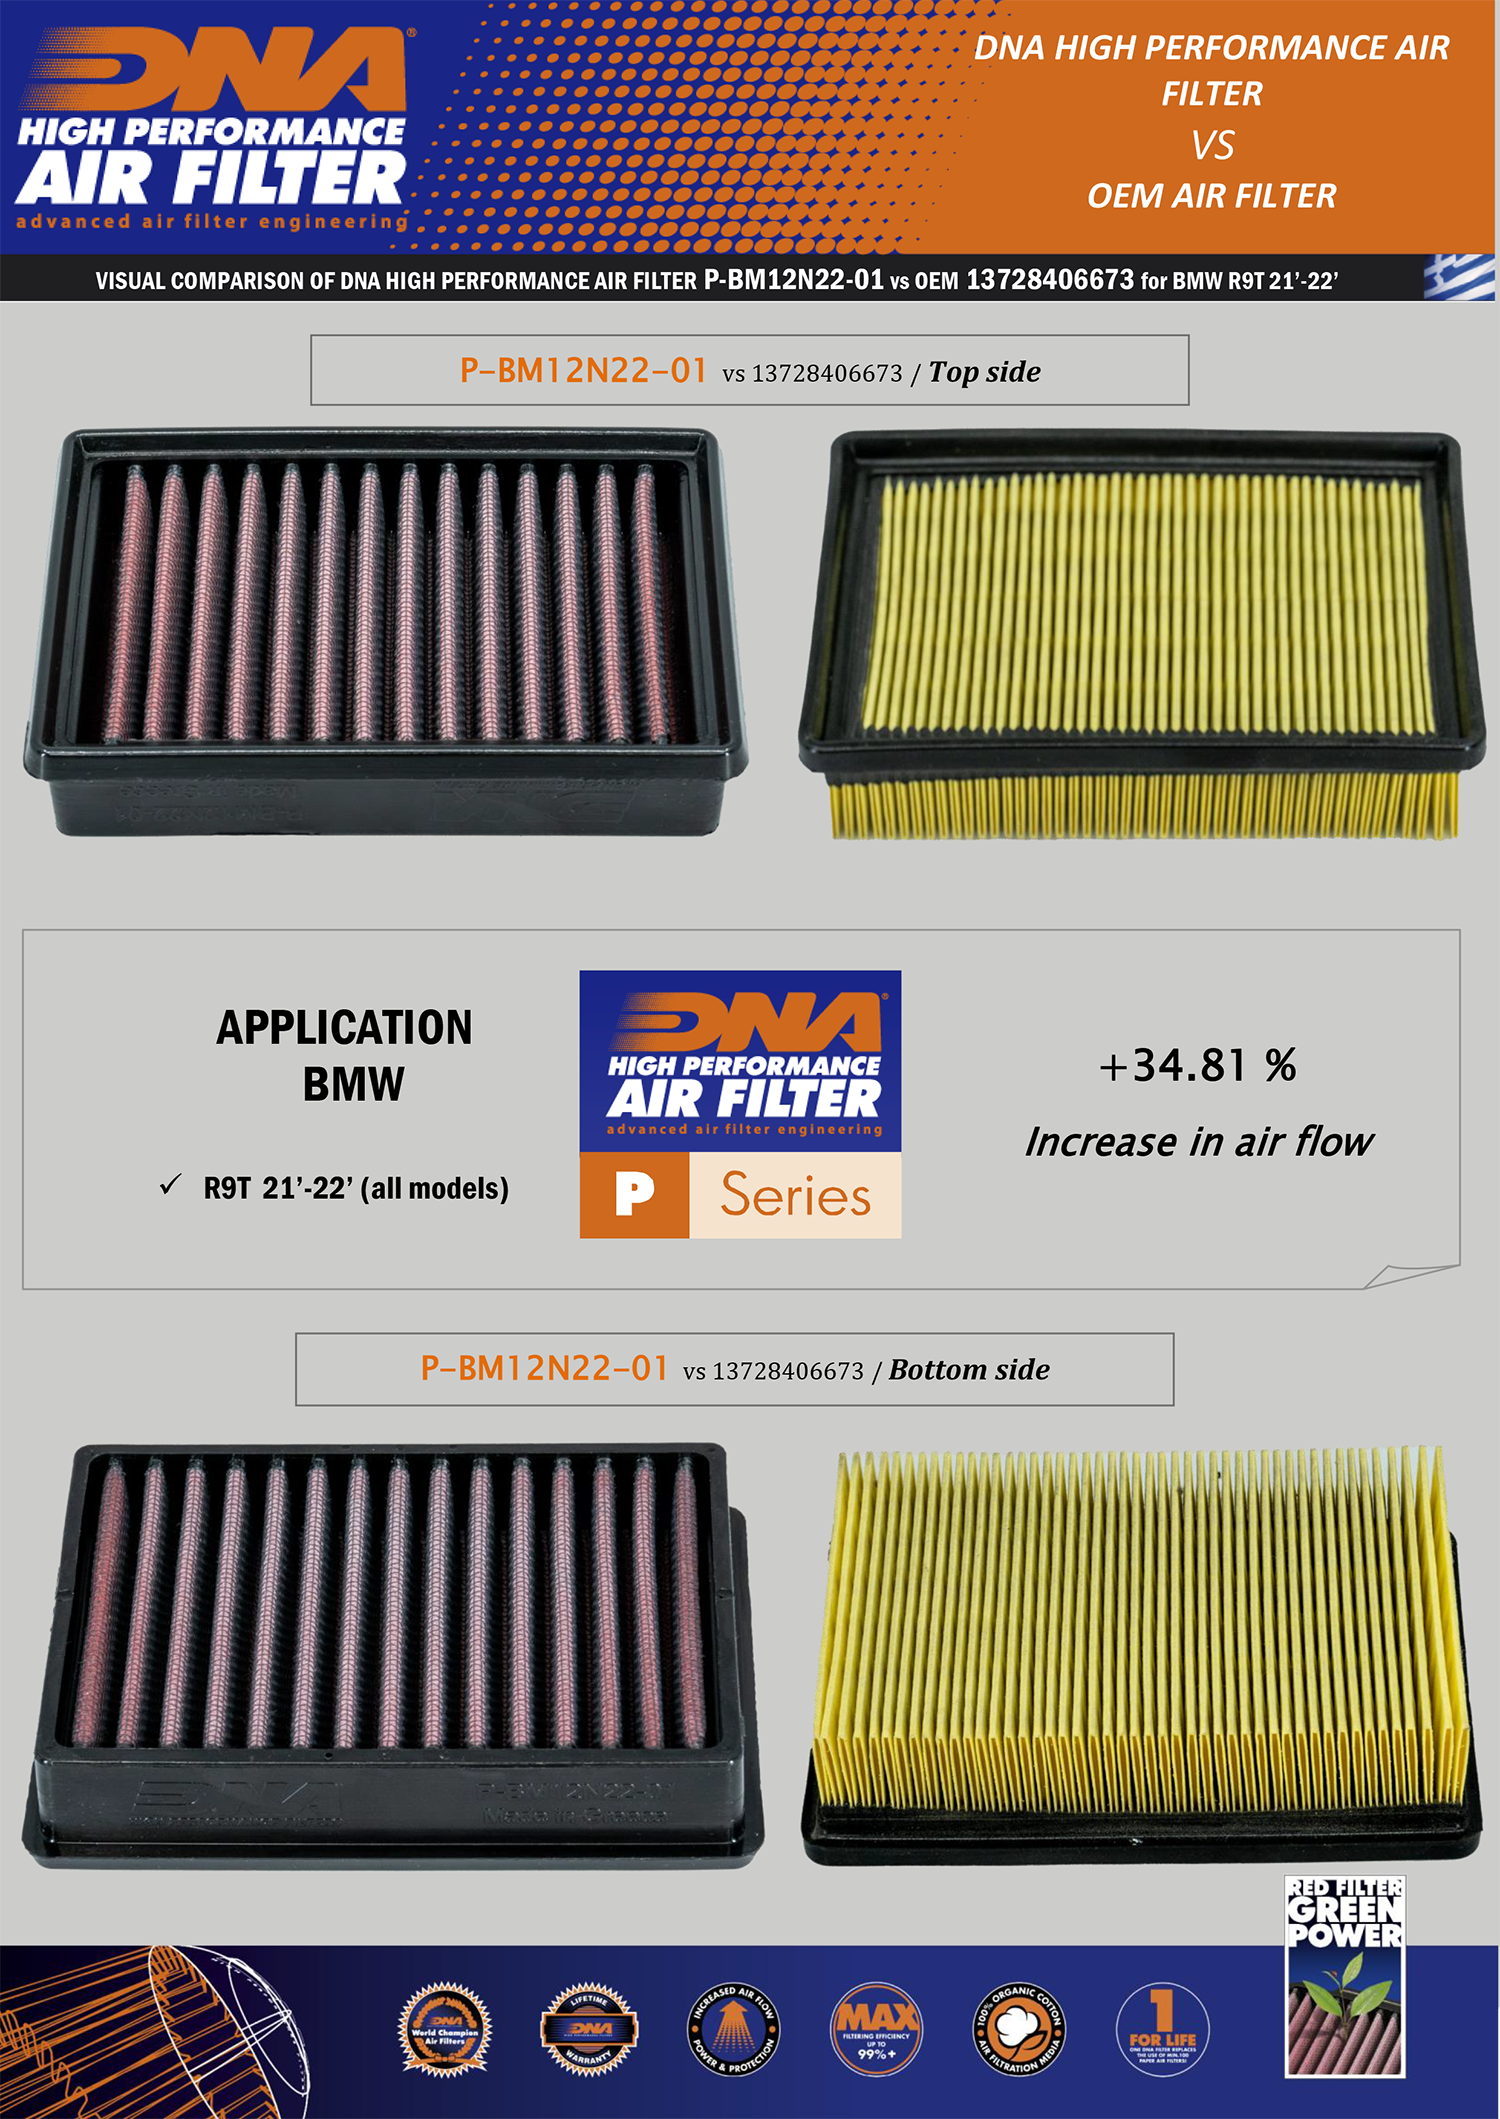 DNA Filters have superior airflow compared to stock bmw oem filters